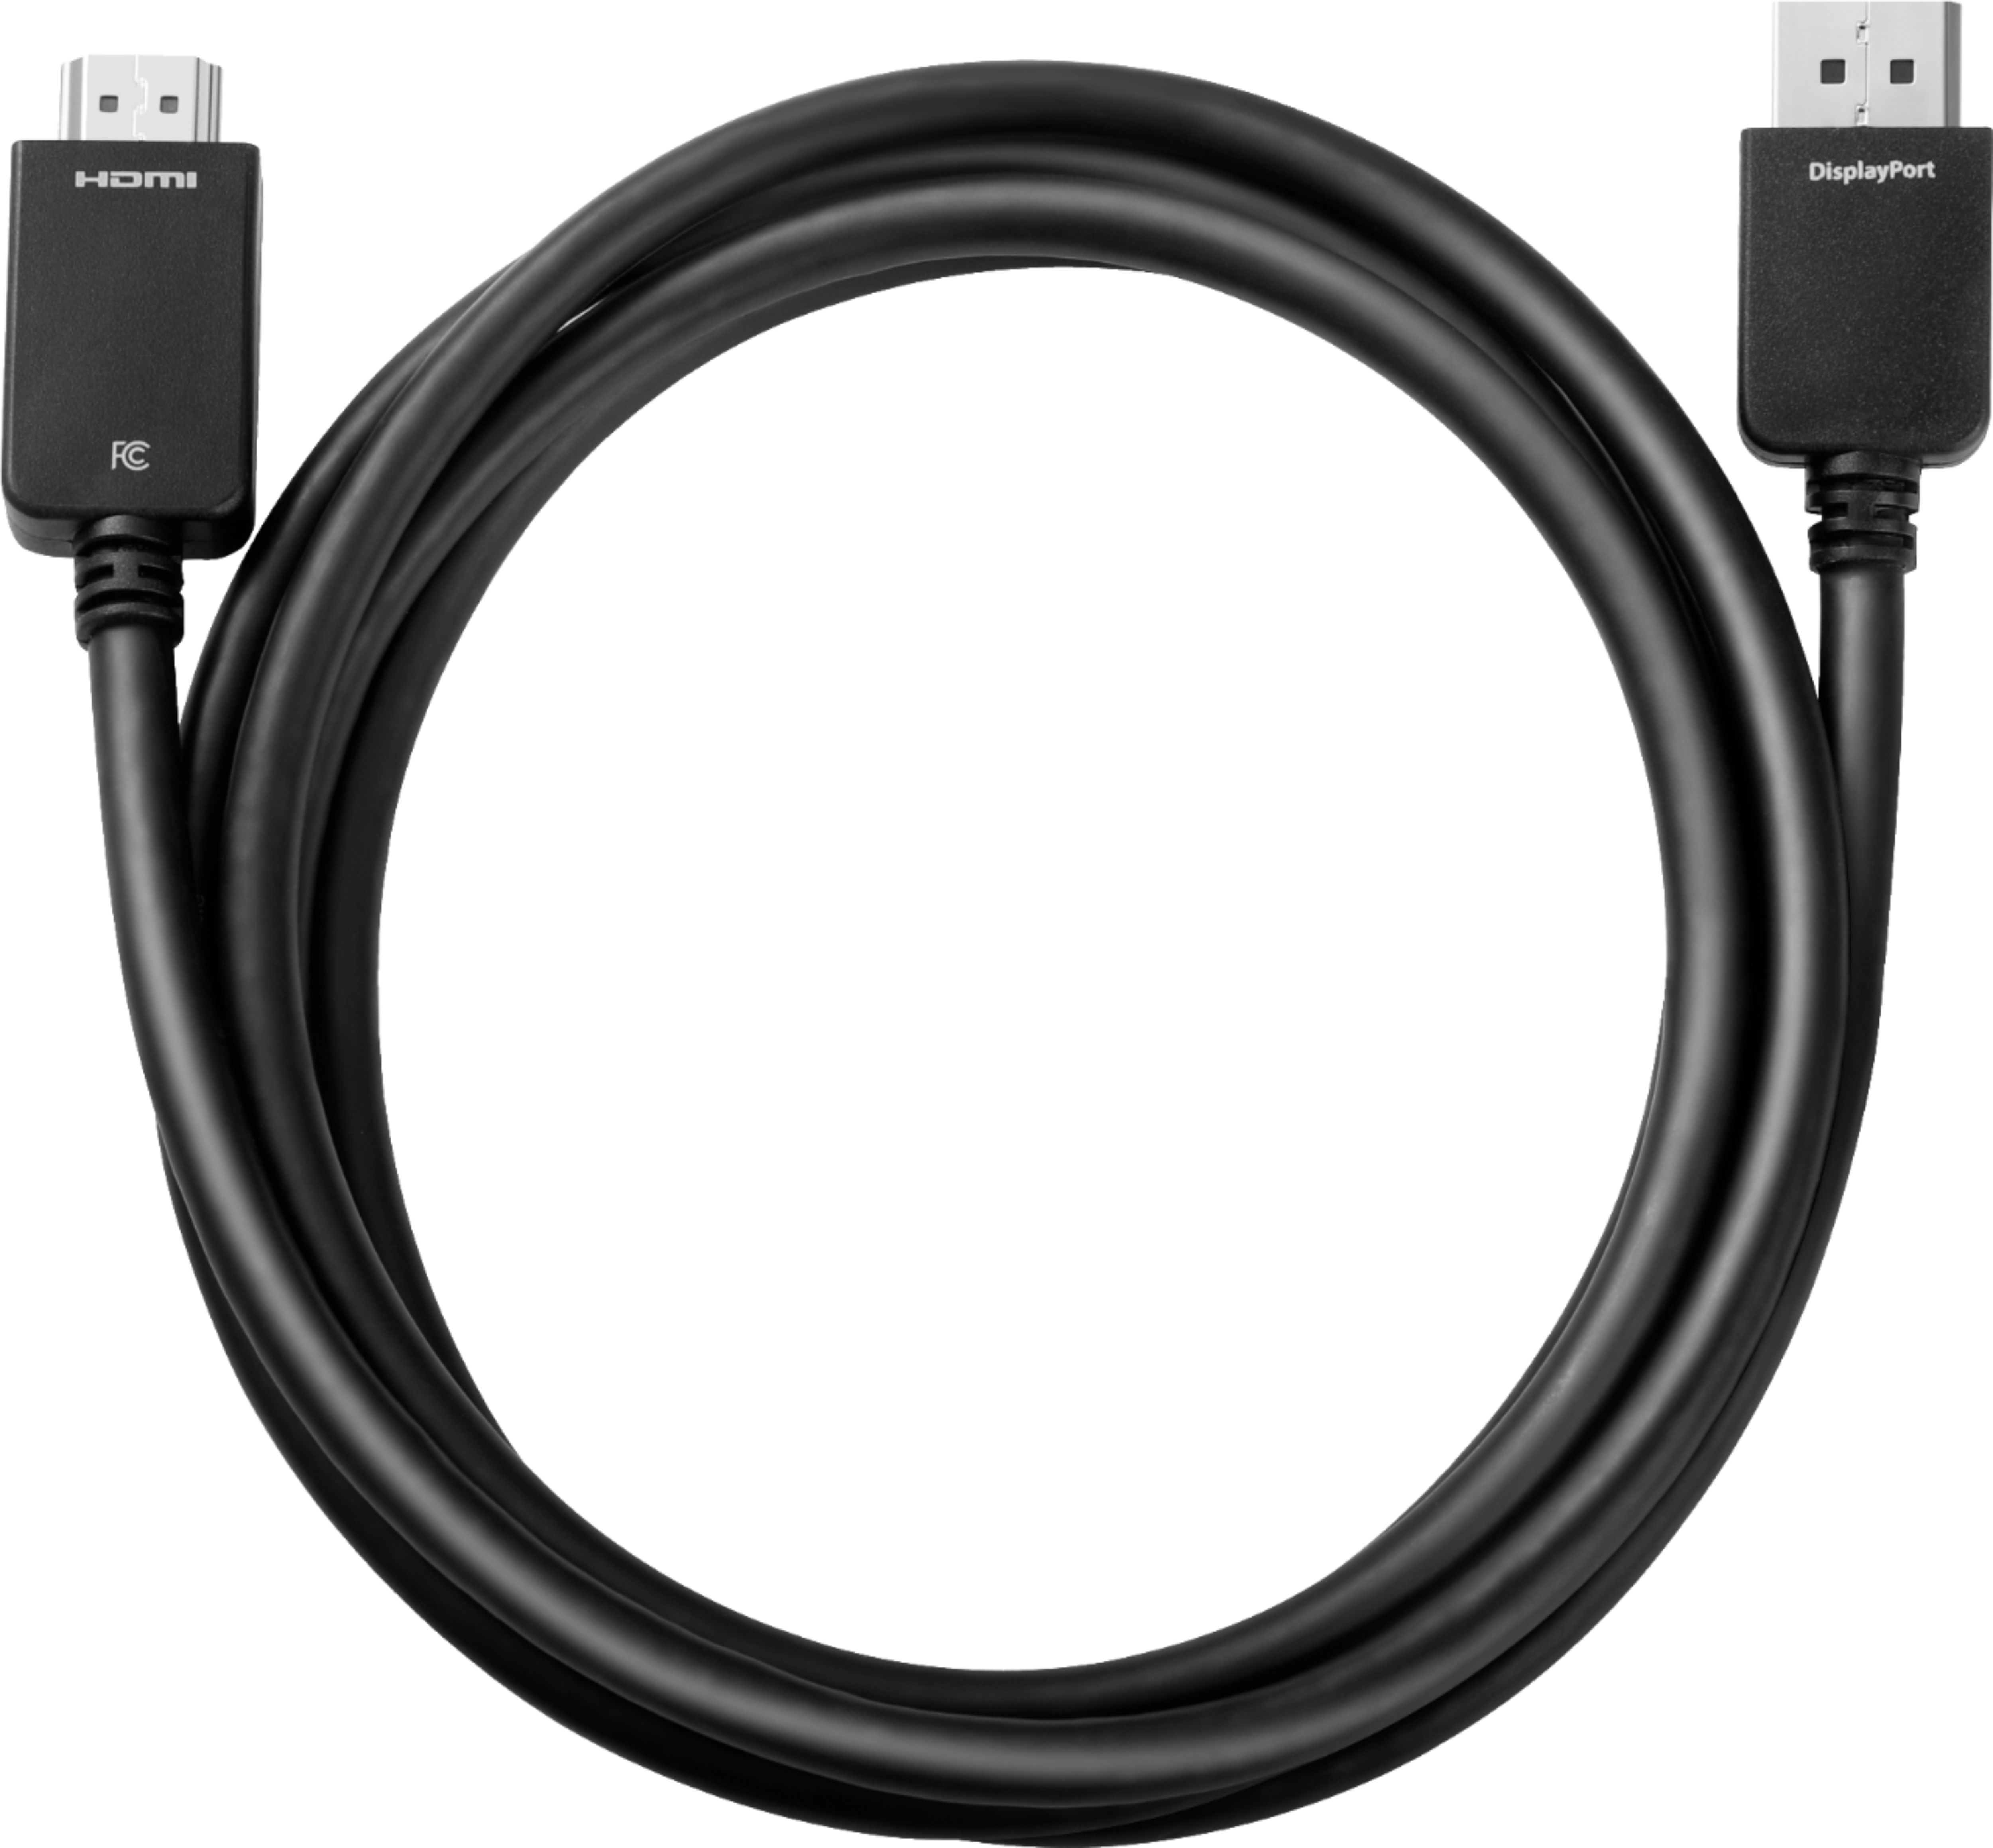 Basics DisplayPort to HDMI Display Cable, Uni-Directional, 4k@30Hz,  1920x1200, 1080p, Gold-Plated Plugs, 6 Foot, Black